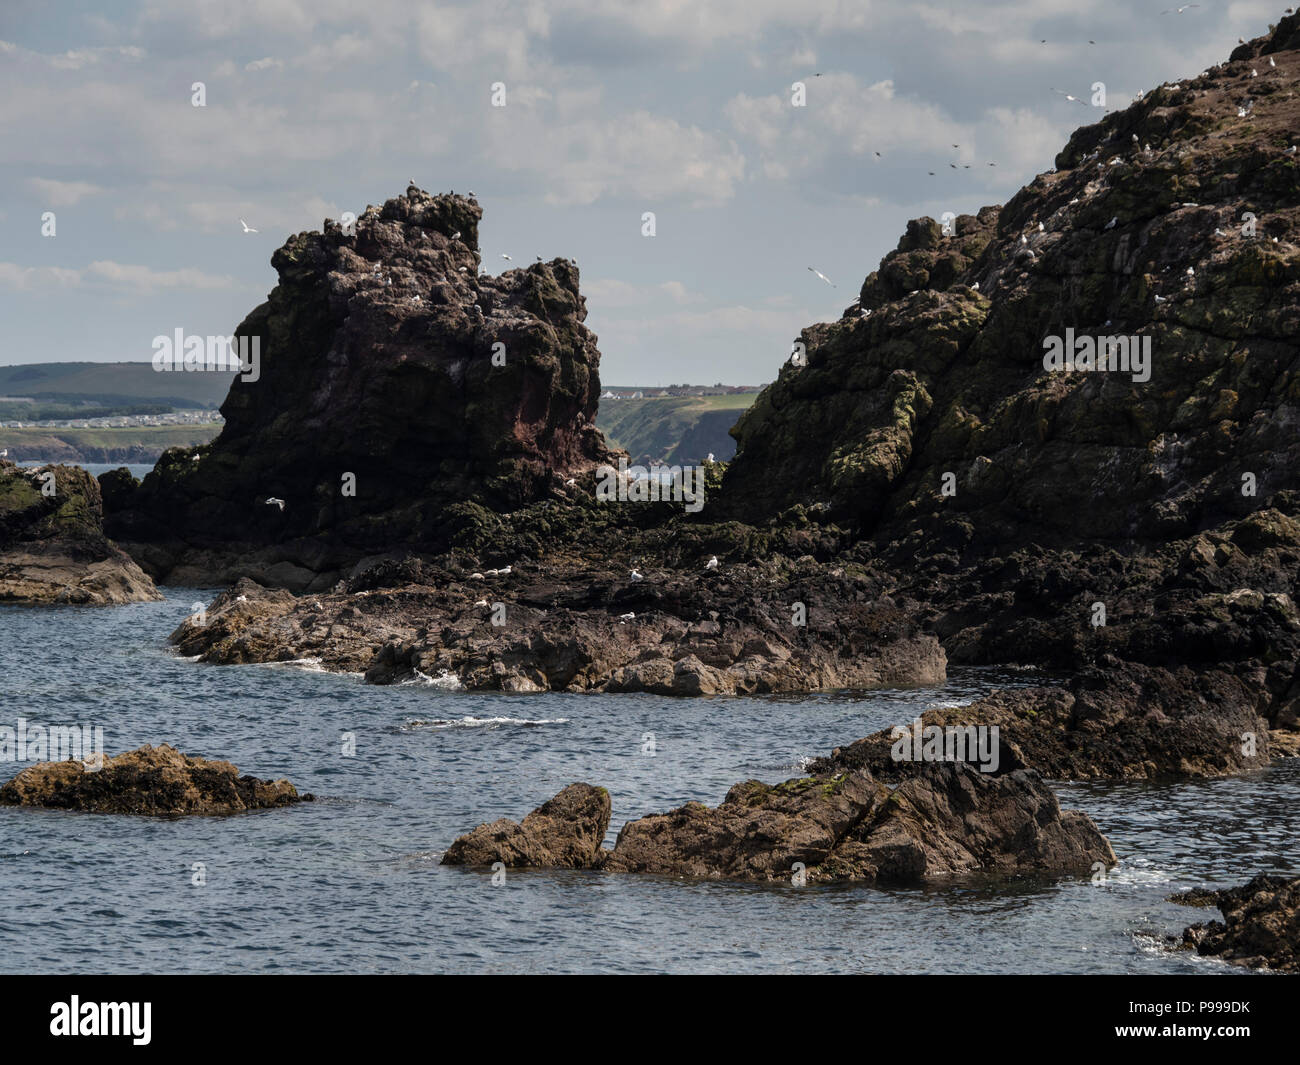 St Abbs harbour village with fishing, scuba diving, sailing - Berwickshire coast, Scotland. Gulls on the rocky shore. Stock Photo